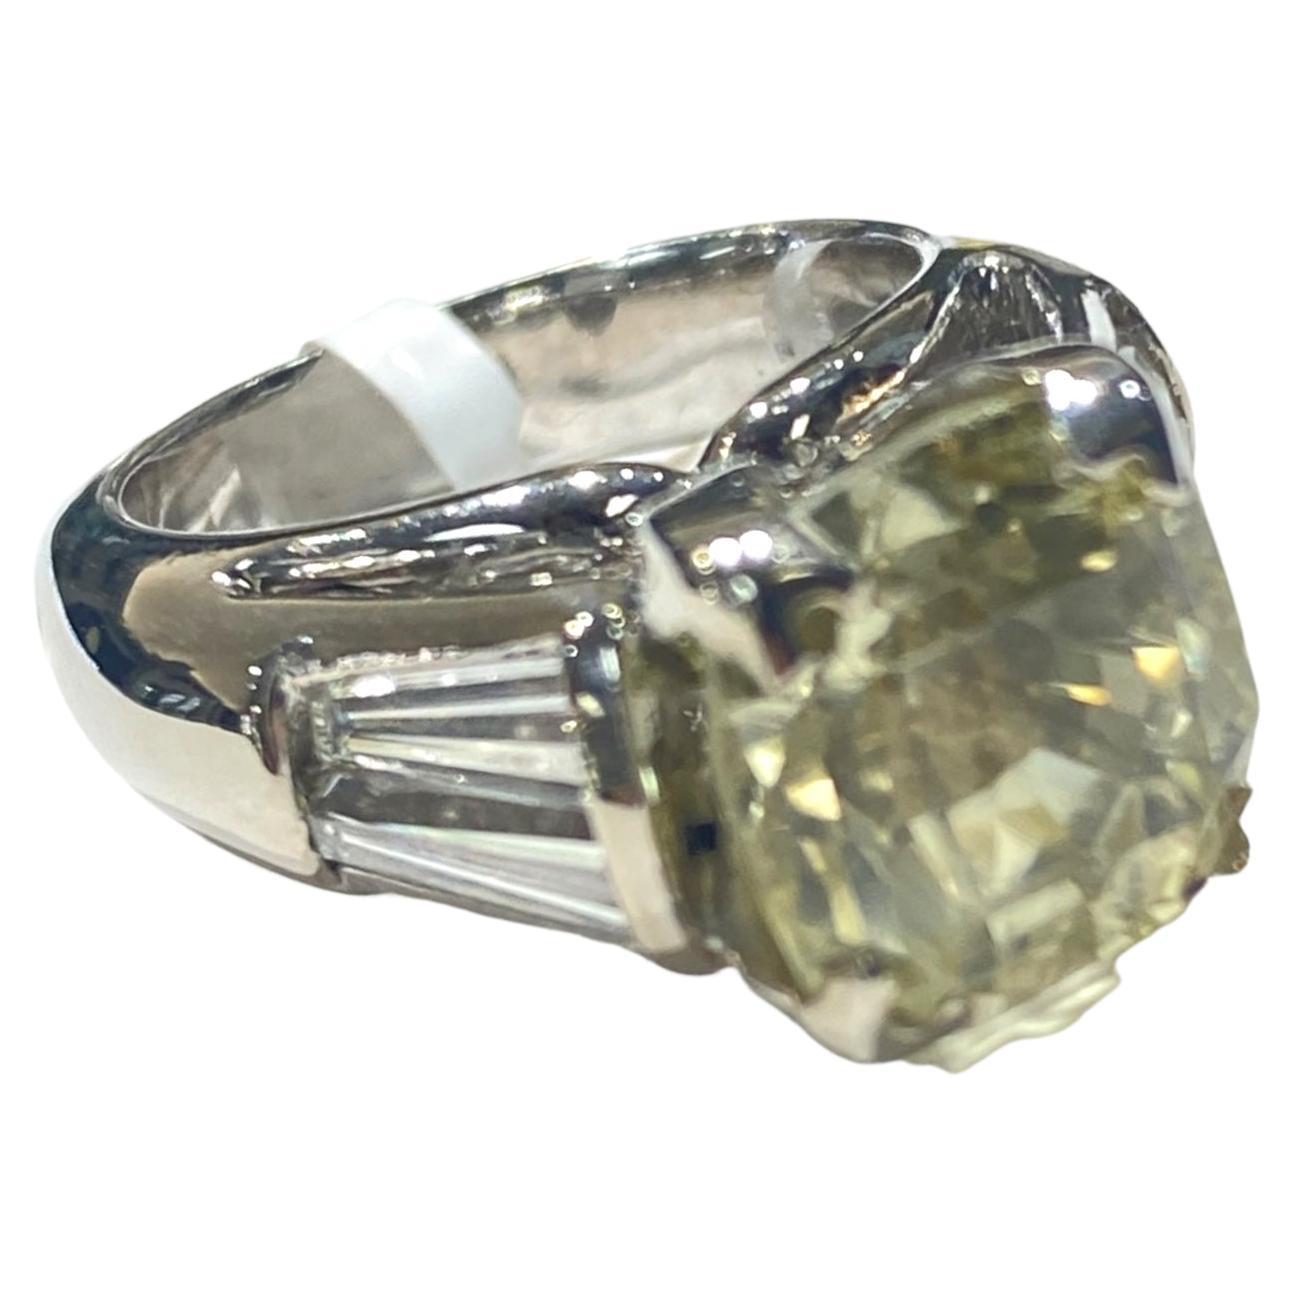 Beautiful, engagement ring features a cushion-cut yellow sapphire. The sapphire is a certified EGL natural gemstone from. Diamonds are very long and hard to find, this size.
  The ring shank graduates from a 7 mm to a 4.30 mm at the bottom and the